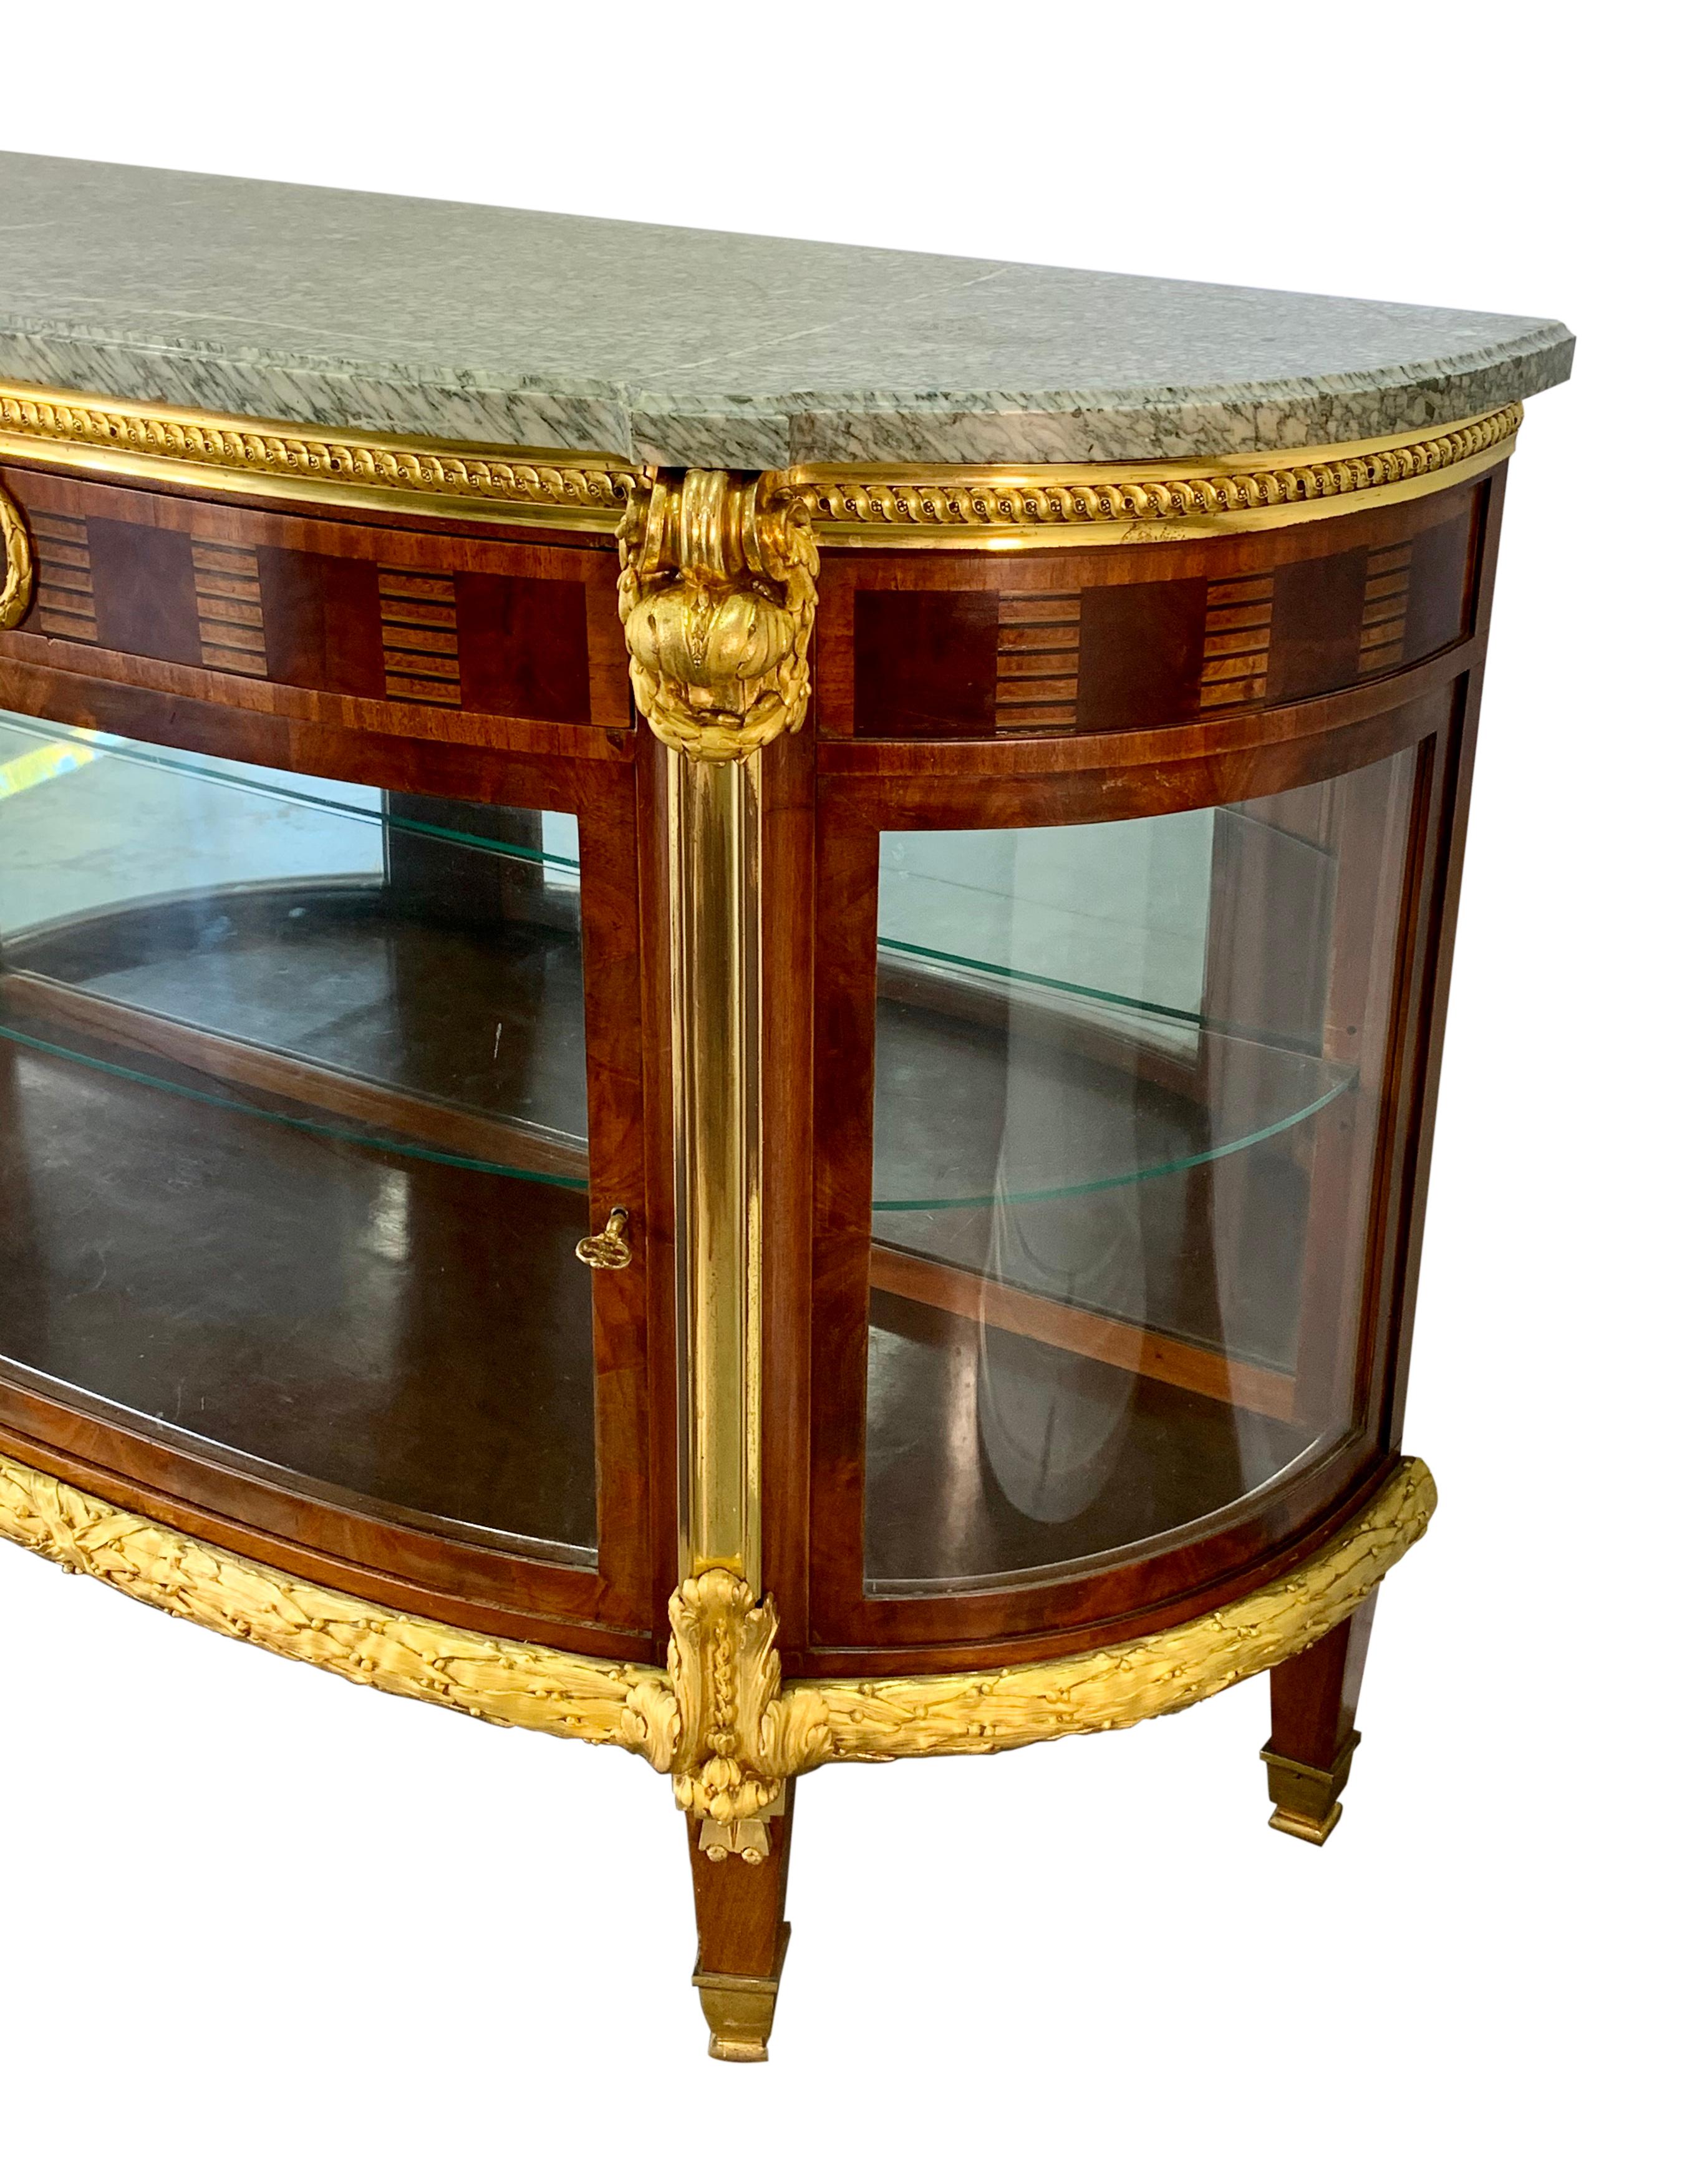 A wonderful quality 19th century French Louis XVI style ormolu mounted commode or vitrine. The D-shaped grey and green veined marble top above a single drawer with parquetry inlays and a central glazed door with high quality gilt bronze